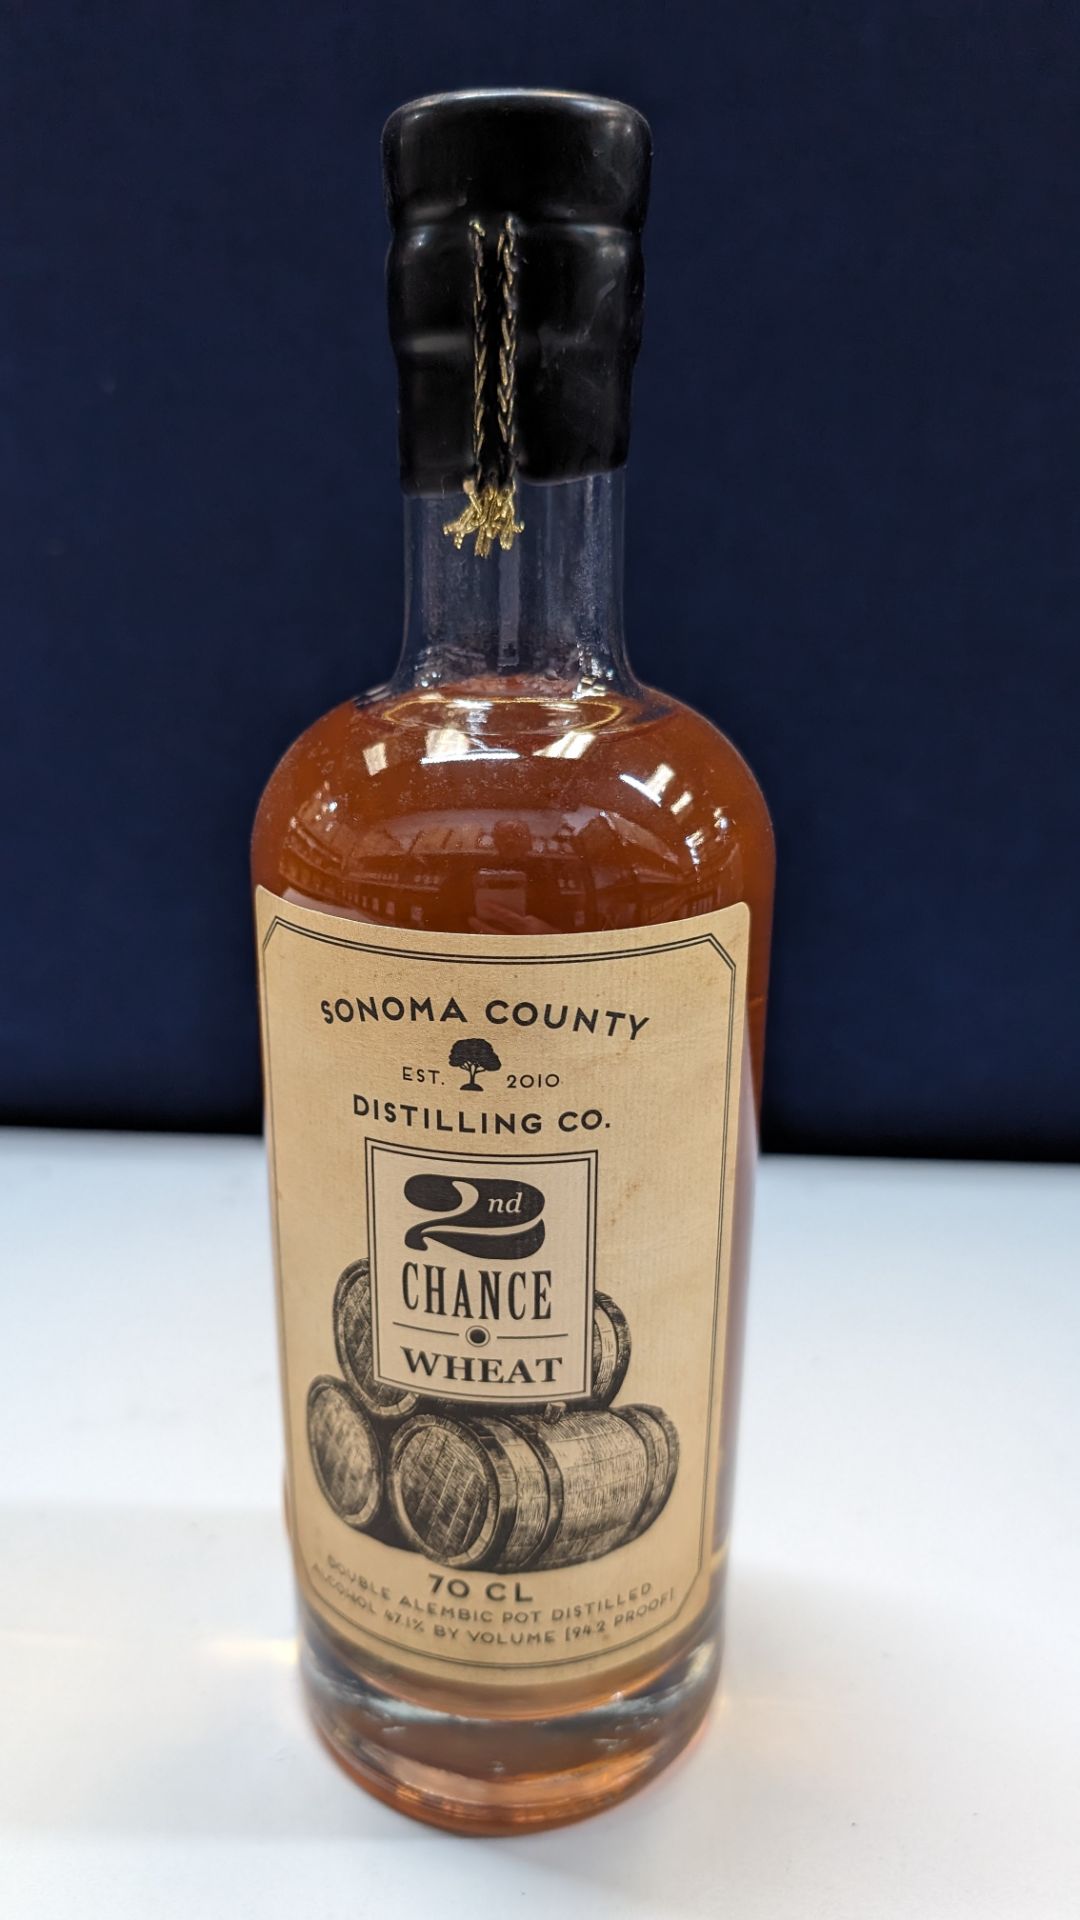 1 off 700ml bottle of Sonoma County 2nd Chance Wheat Double Alembic Pot Distilled Whiskey. 47.1% al - Image 2 of 6